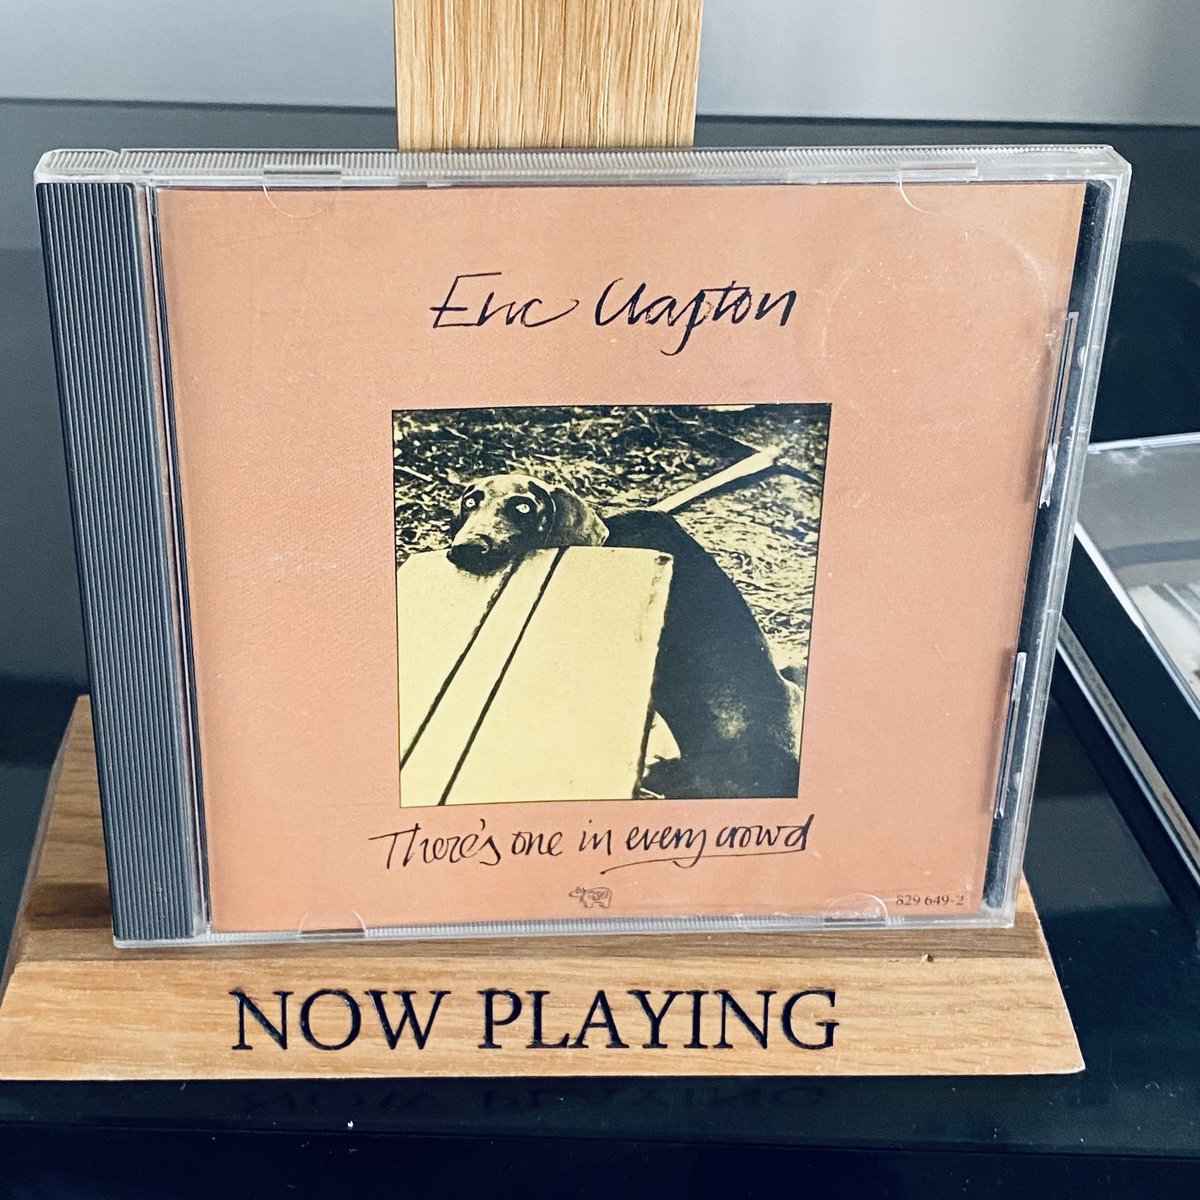 Listening to Eric Clapton “There’s One In Every Crowd” His third solo album from 1975